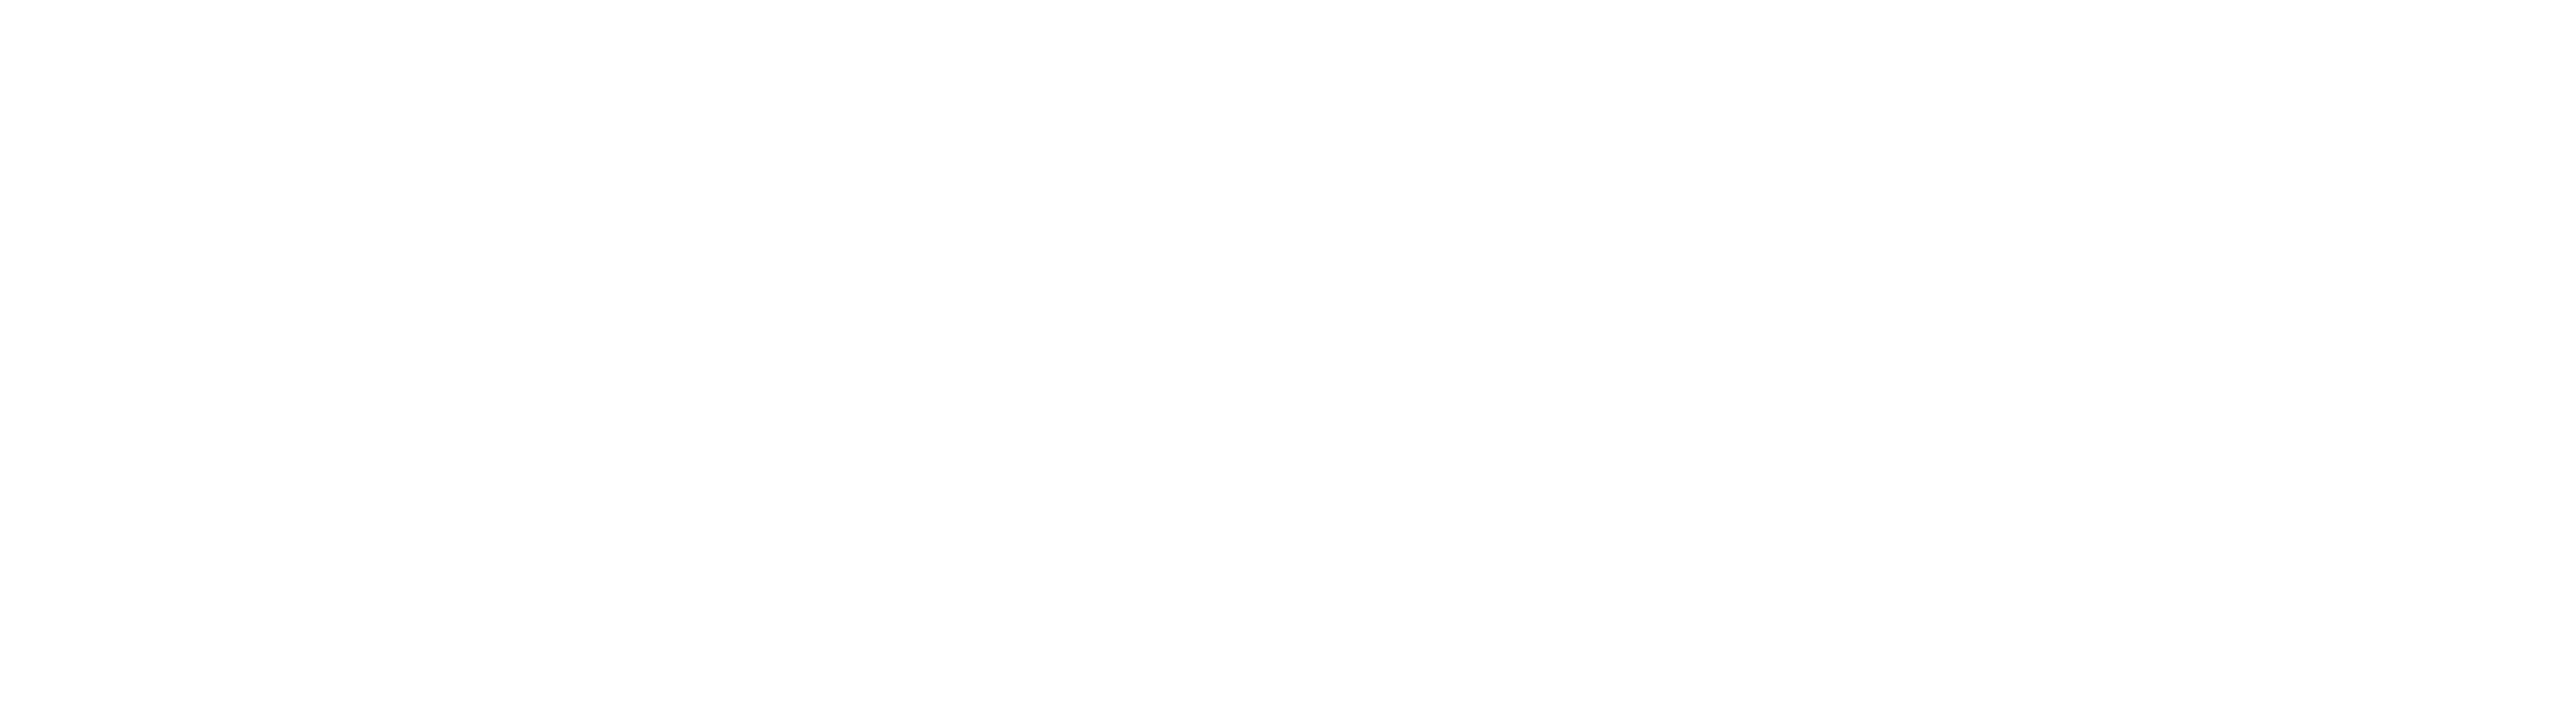 THE MOUTH OF THE TRUMPET